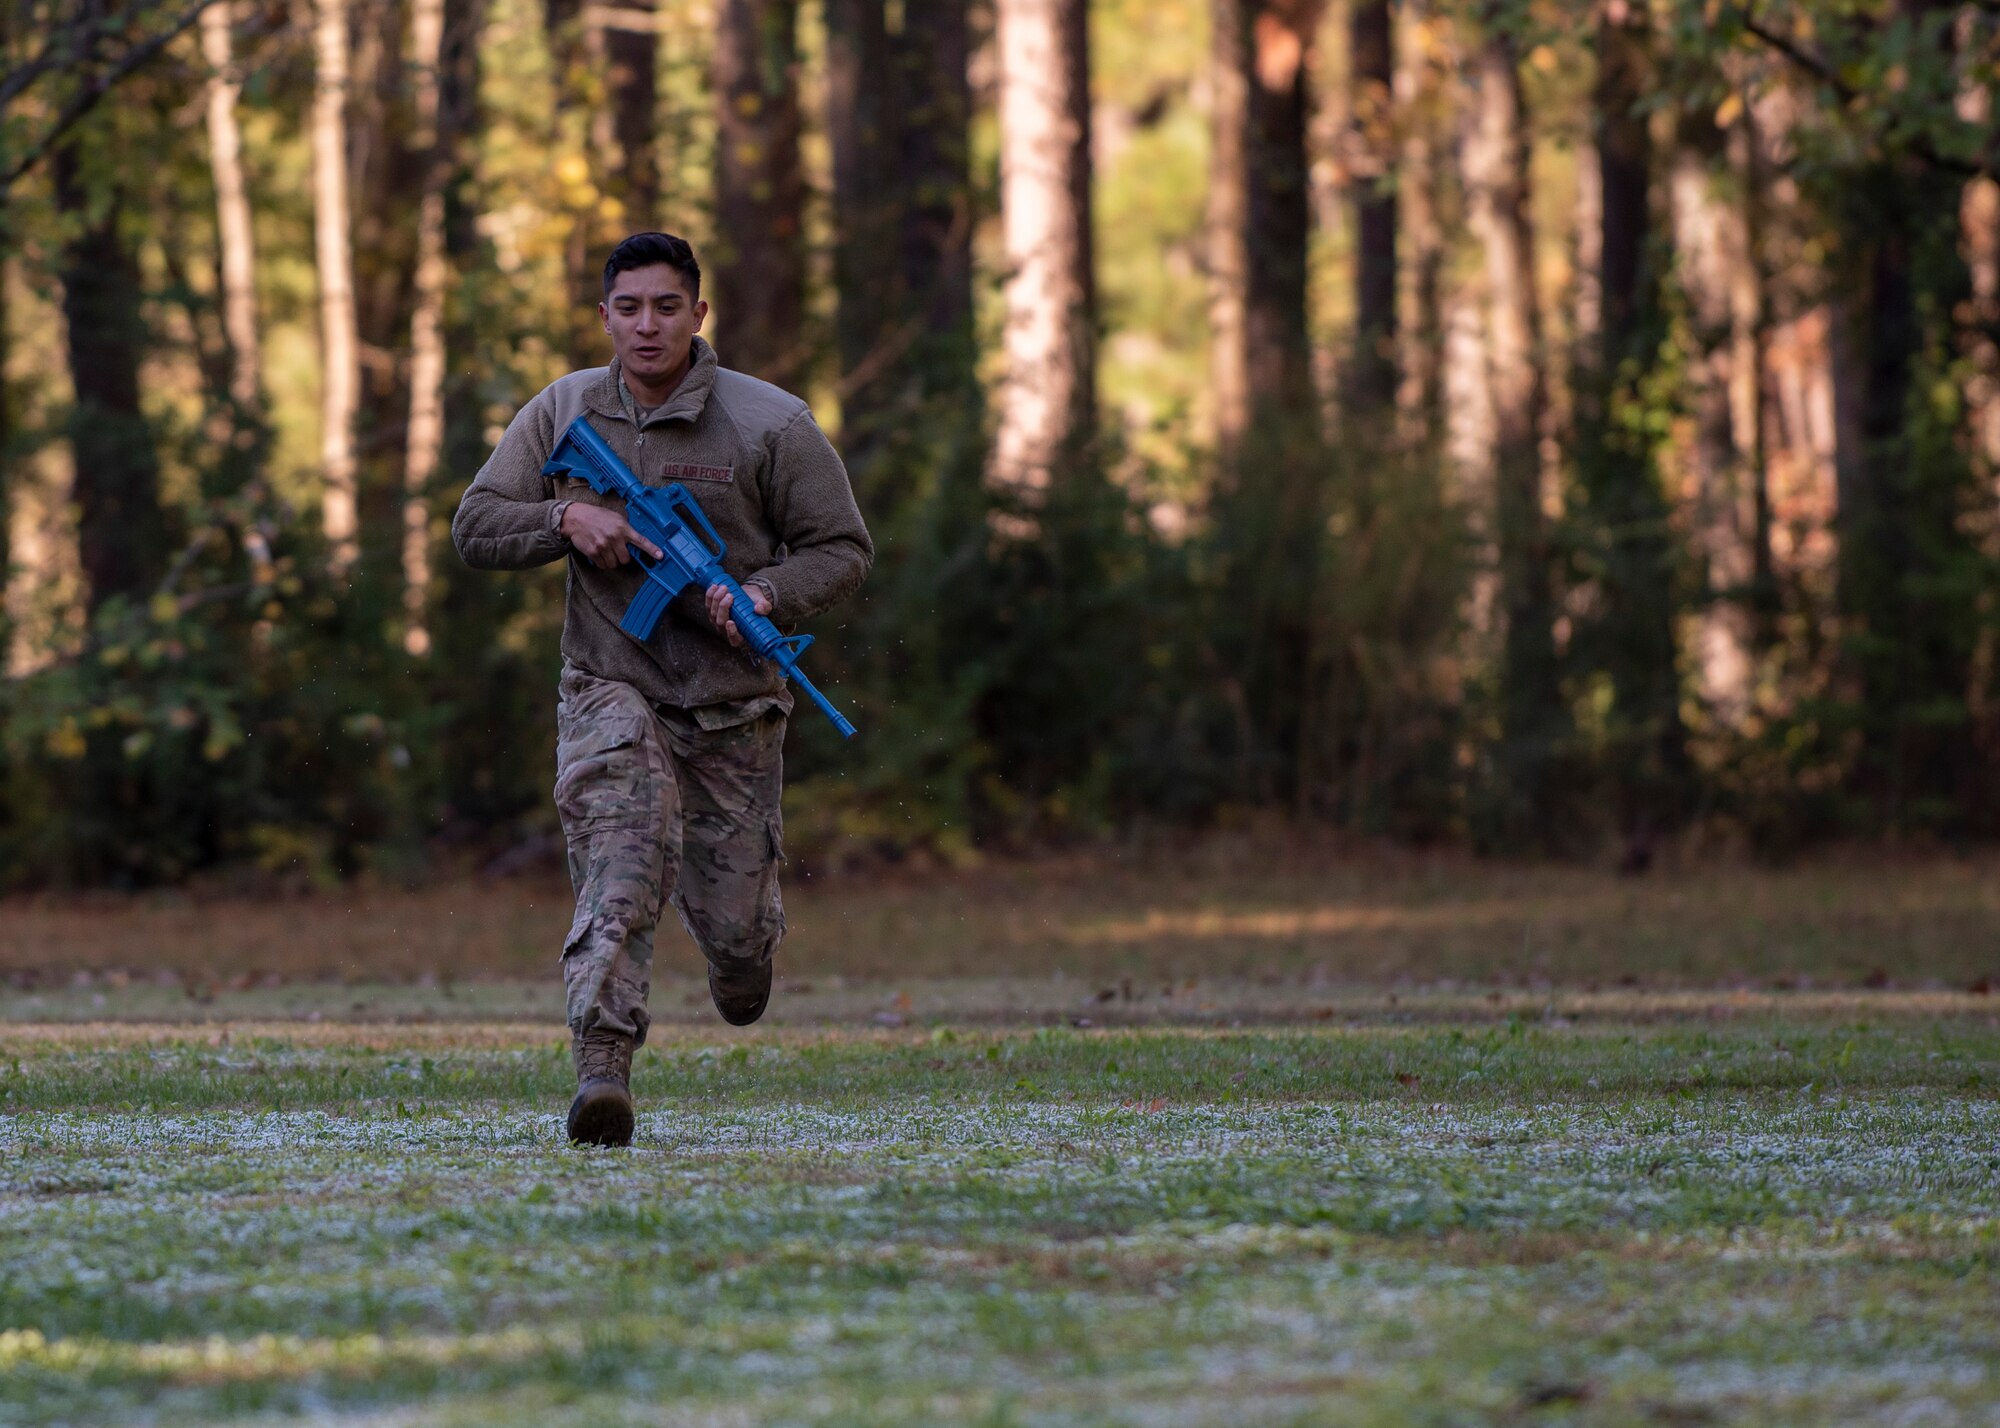 Staff Sgt. Jose Flores, 4th Civil Engineer Squadron pavement and equipment operator, runs across a field during Prime Base Engineer Emergency Force training at Seymour Johnson Air Force Base, North Carolina, Nov. 19, 2020.